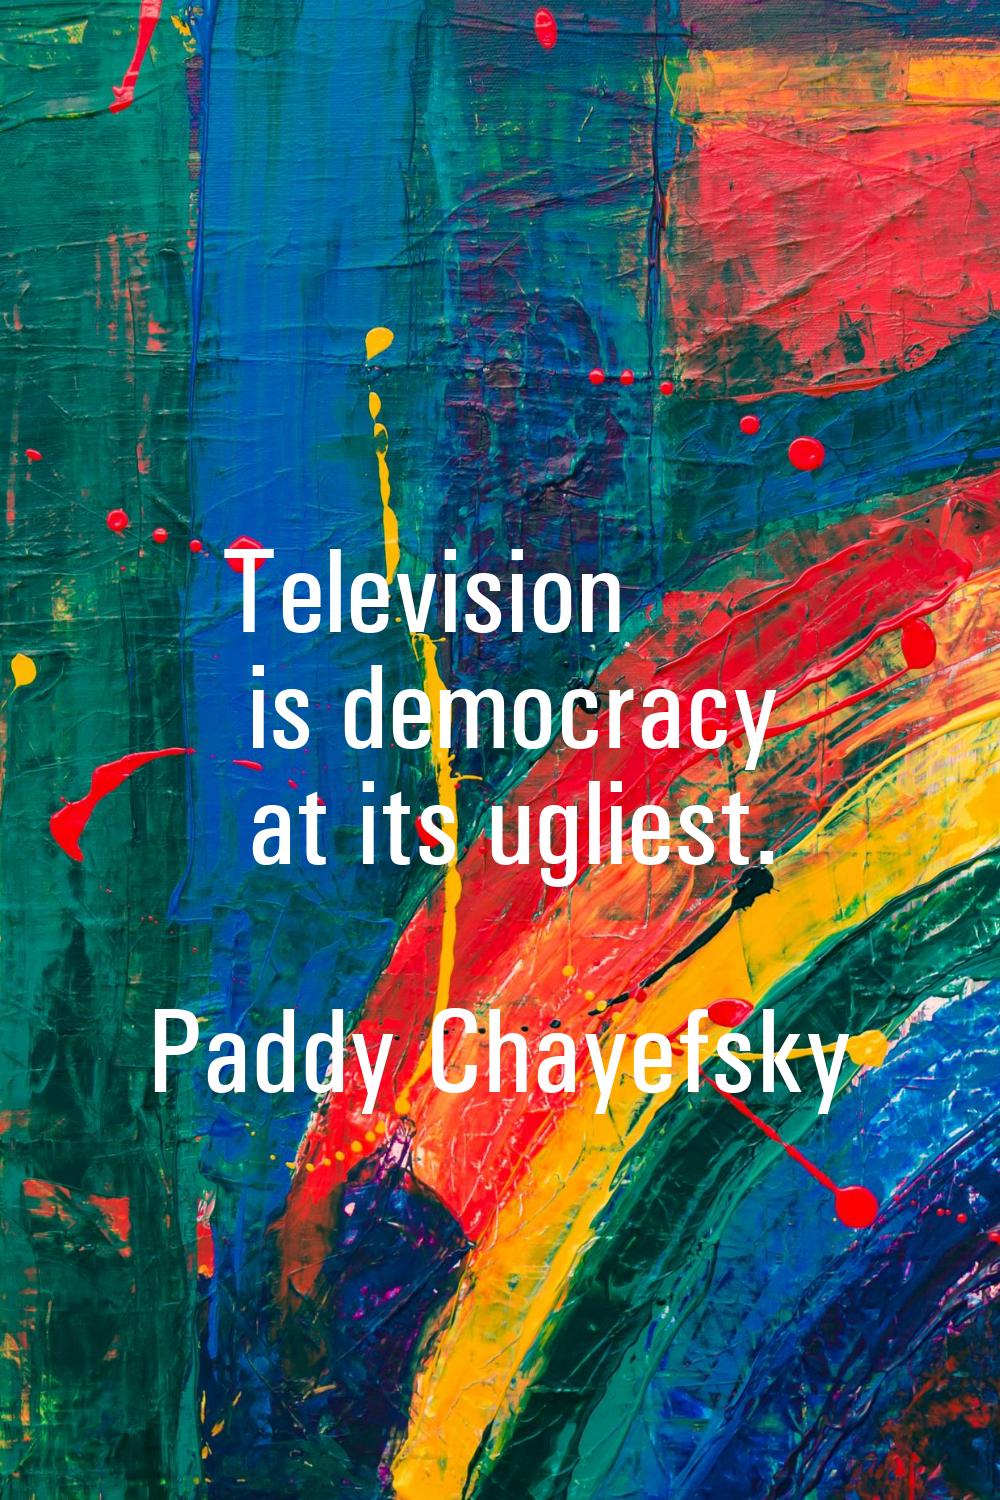 Television is democracy at its ugliest.